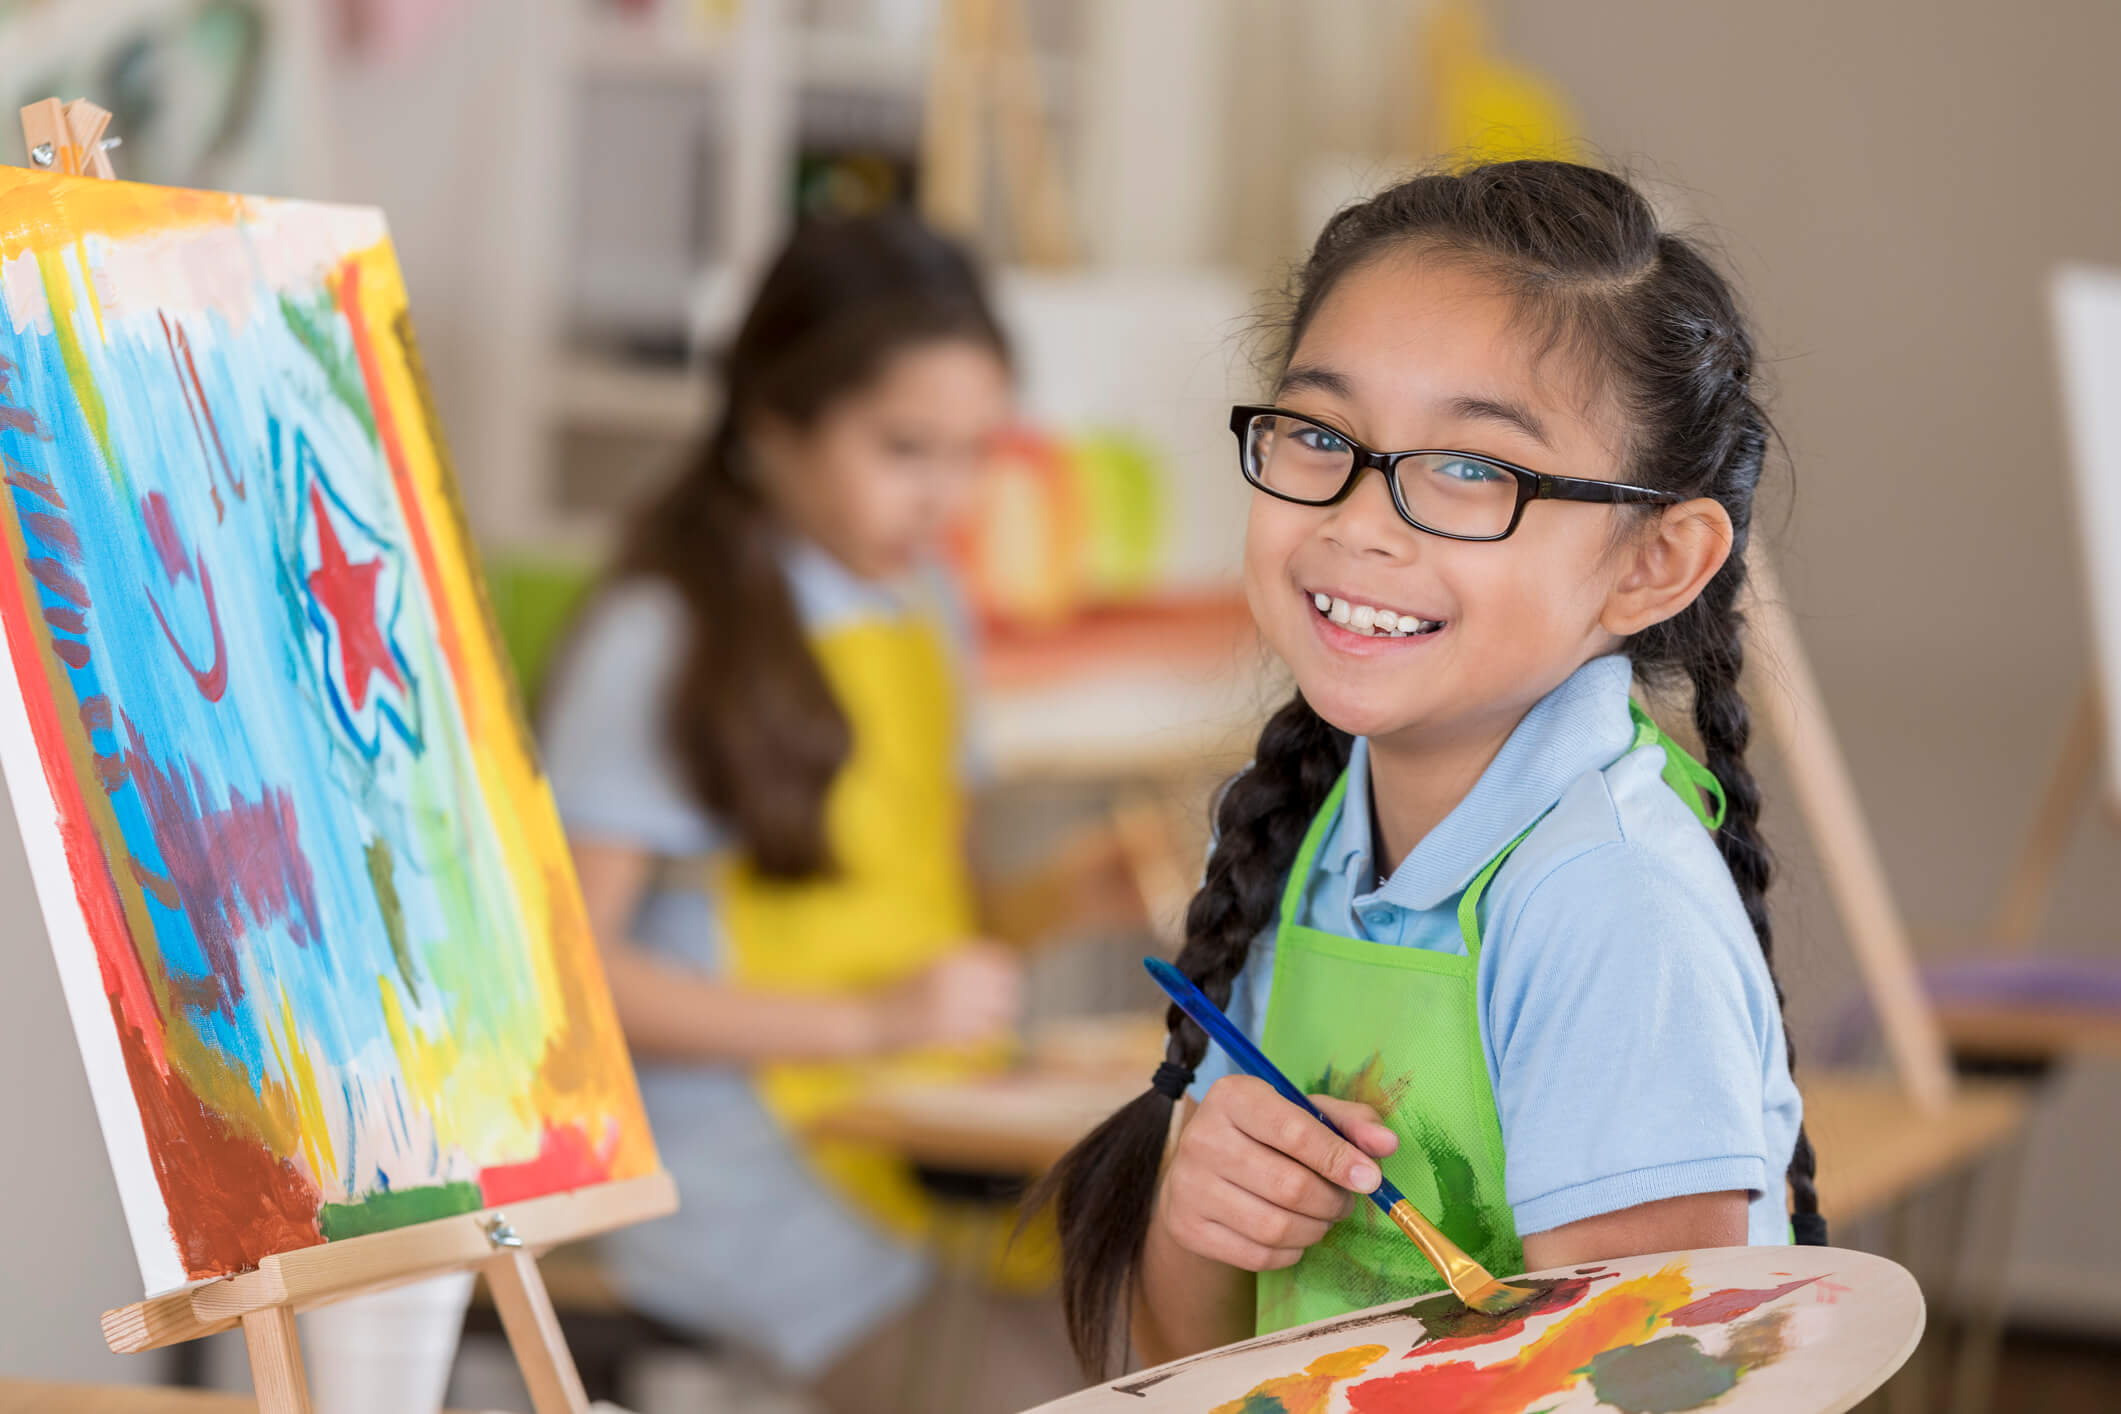 Girl smiling while holding paintbrush and looking at canvas